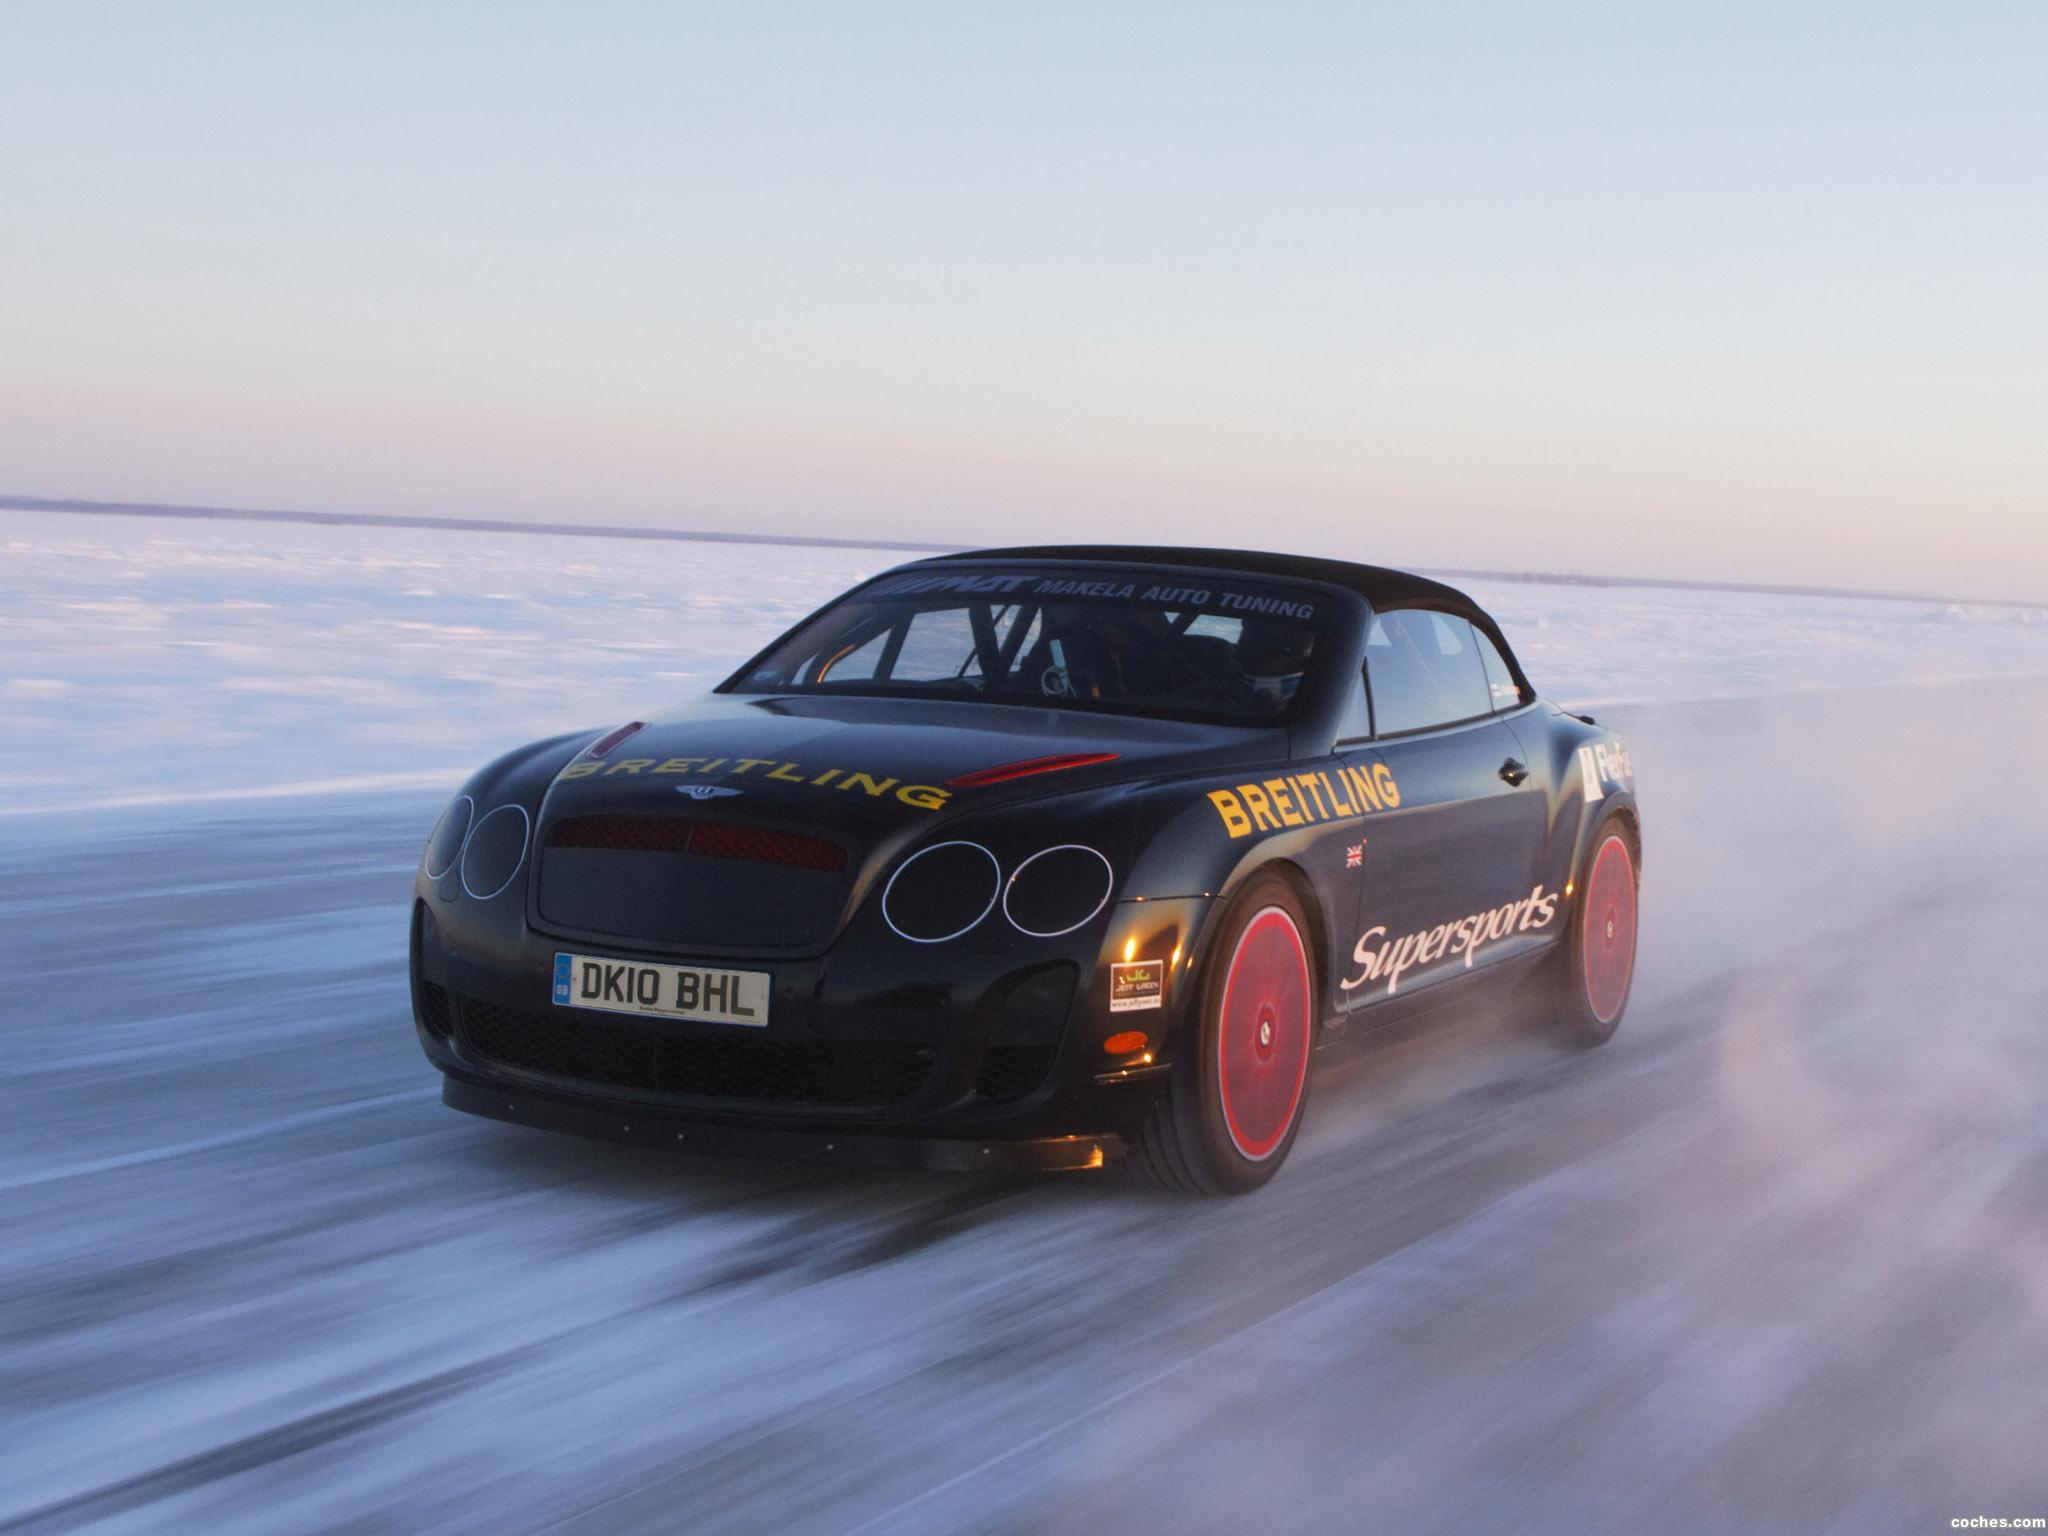 bentley_continental-gt-supersports-convertible-ice-record-car-2011_r7